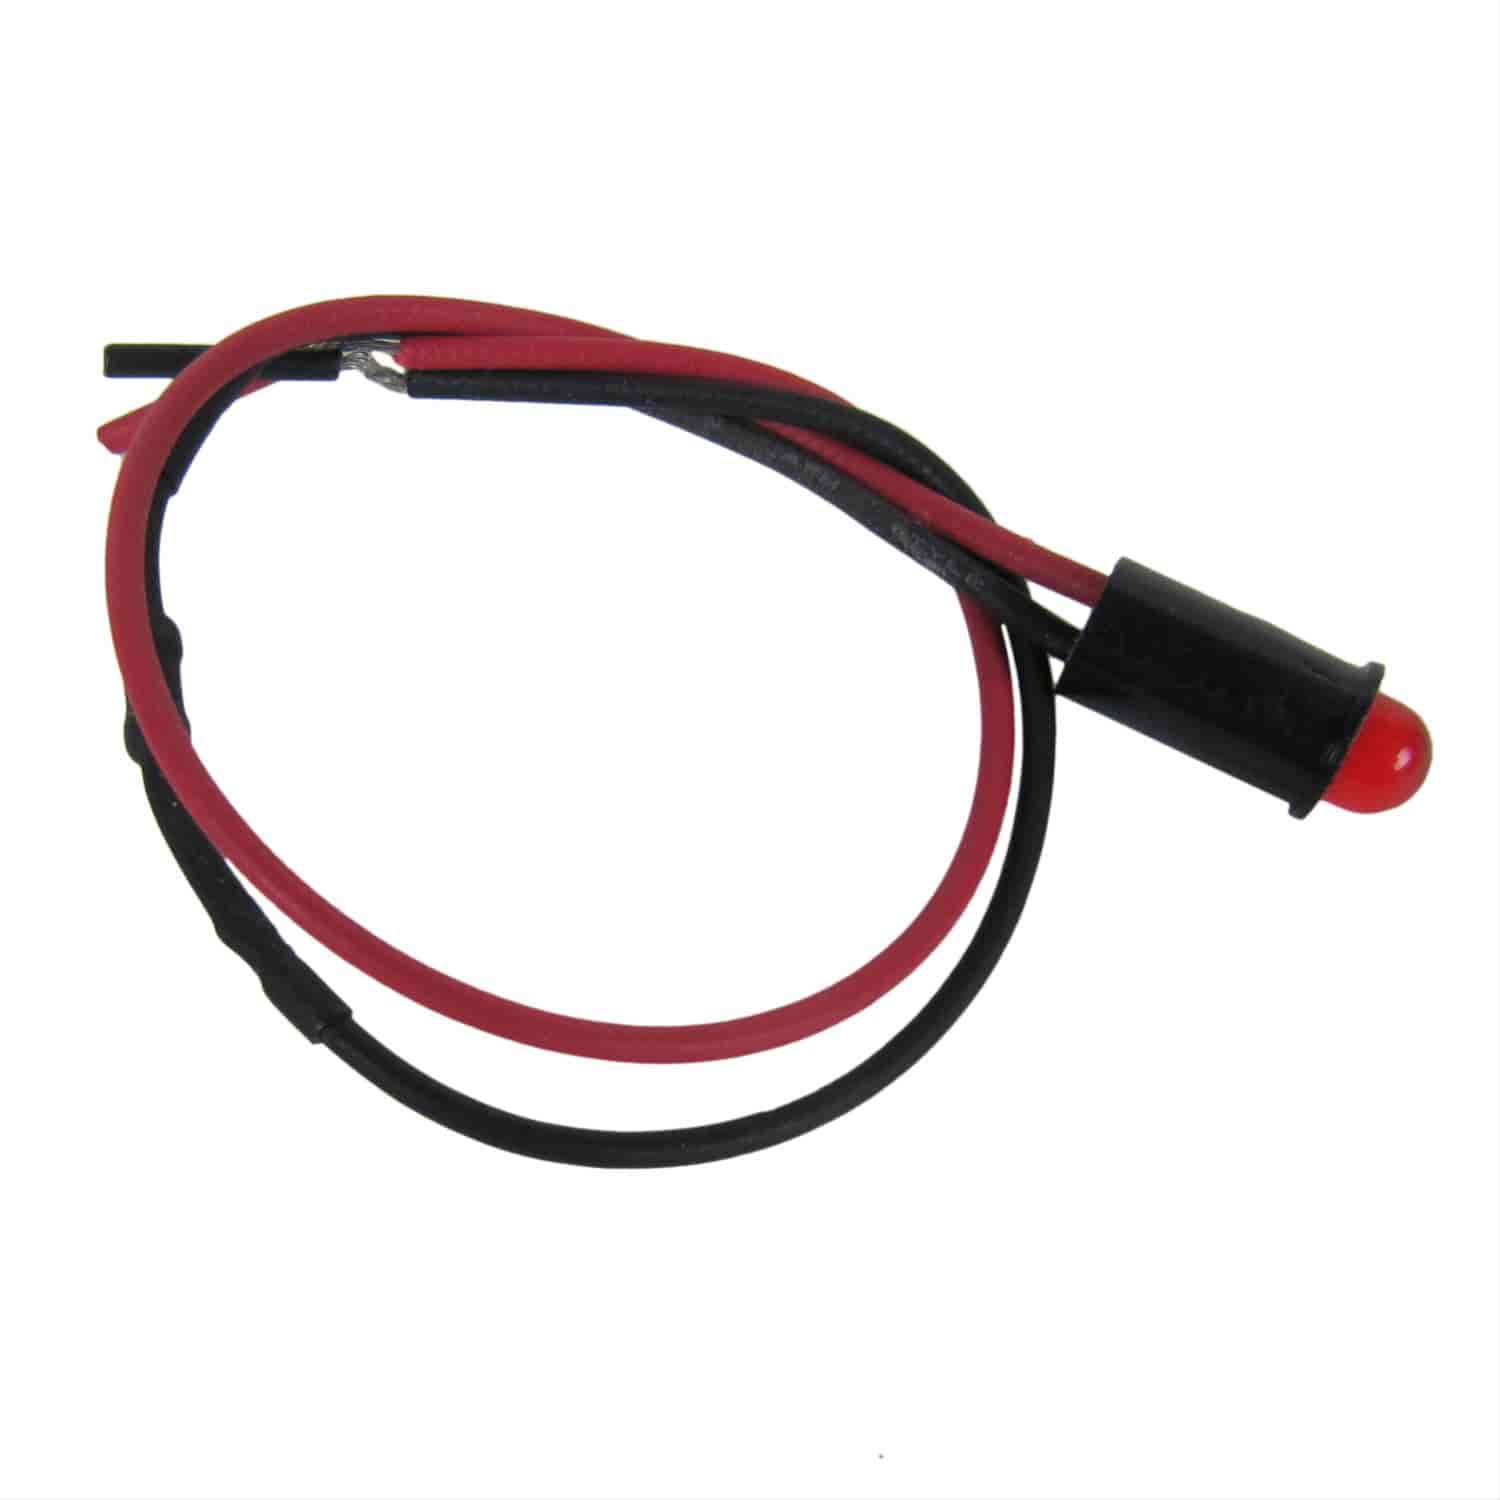 Replacement Indicator Light For Use With Hammer Shifters 130-80885 and 130-81001